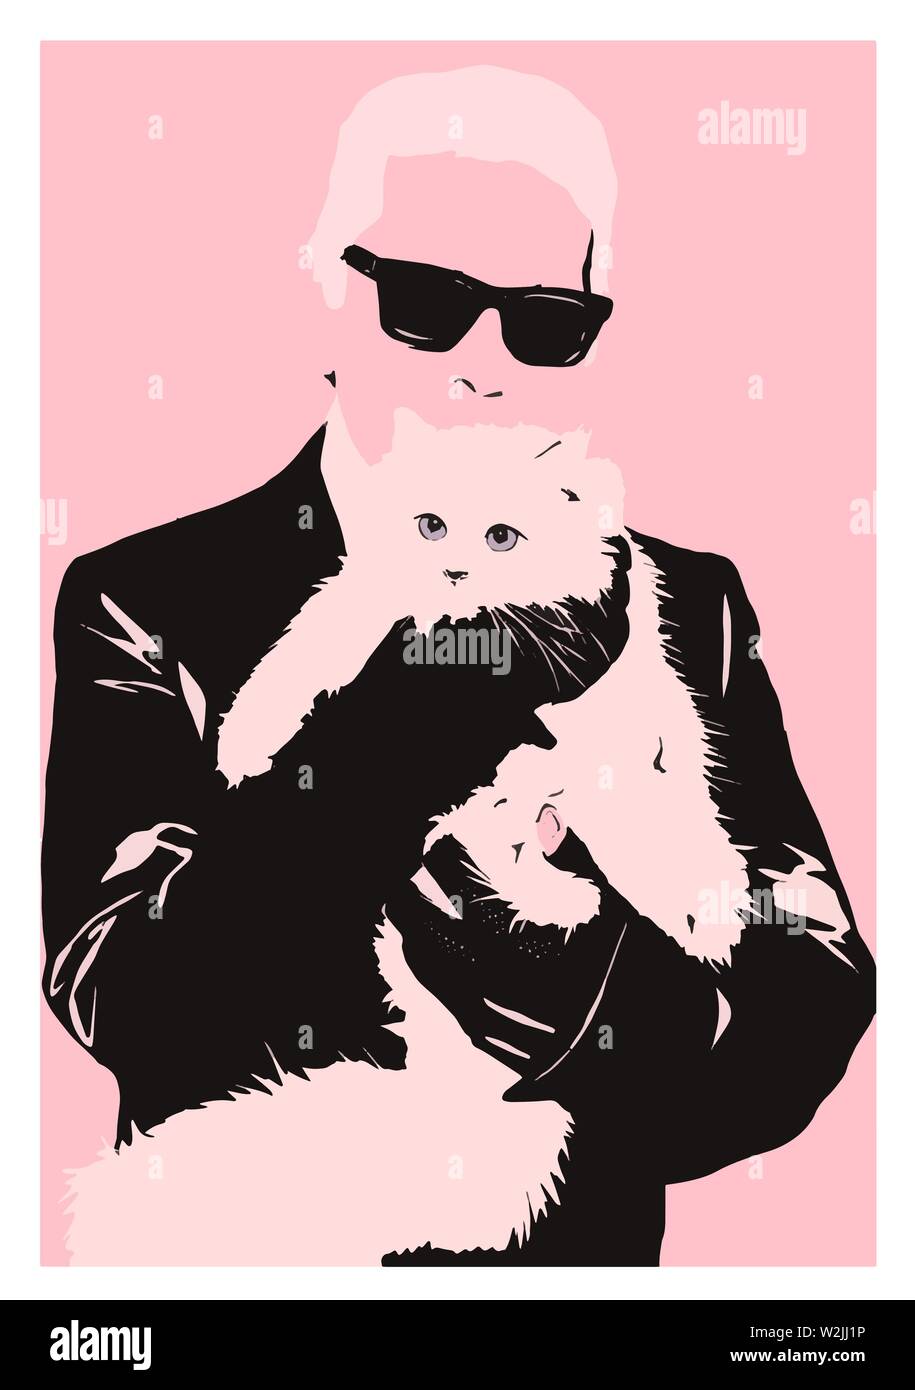 Choupette karl lagerfeld Stock Vector Images - Alamy